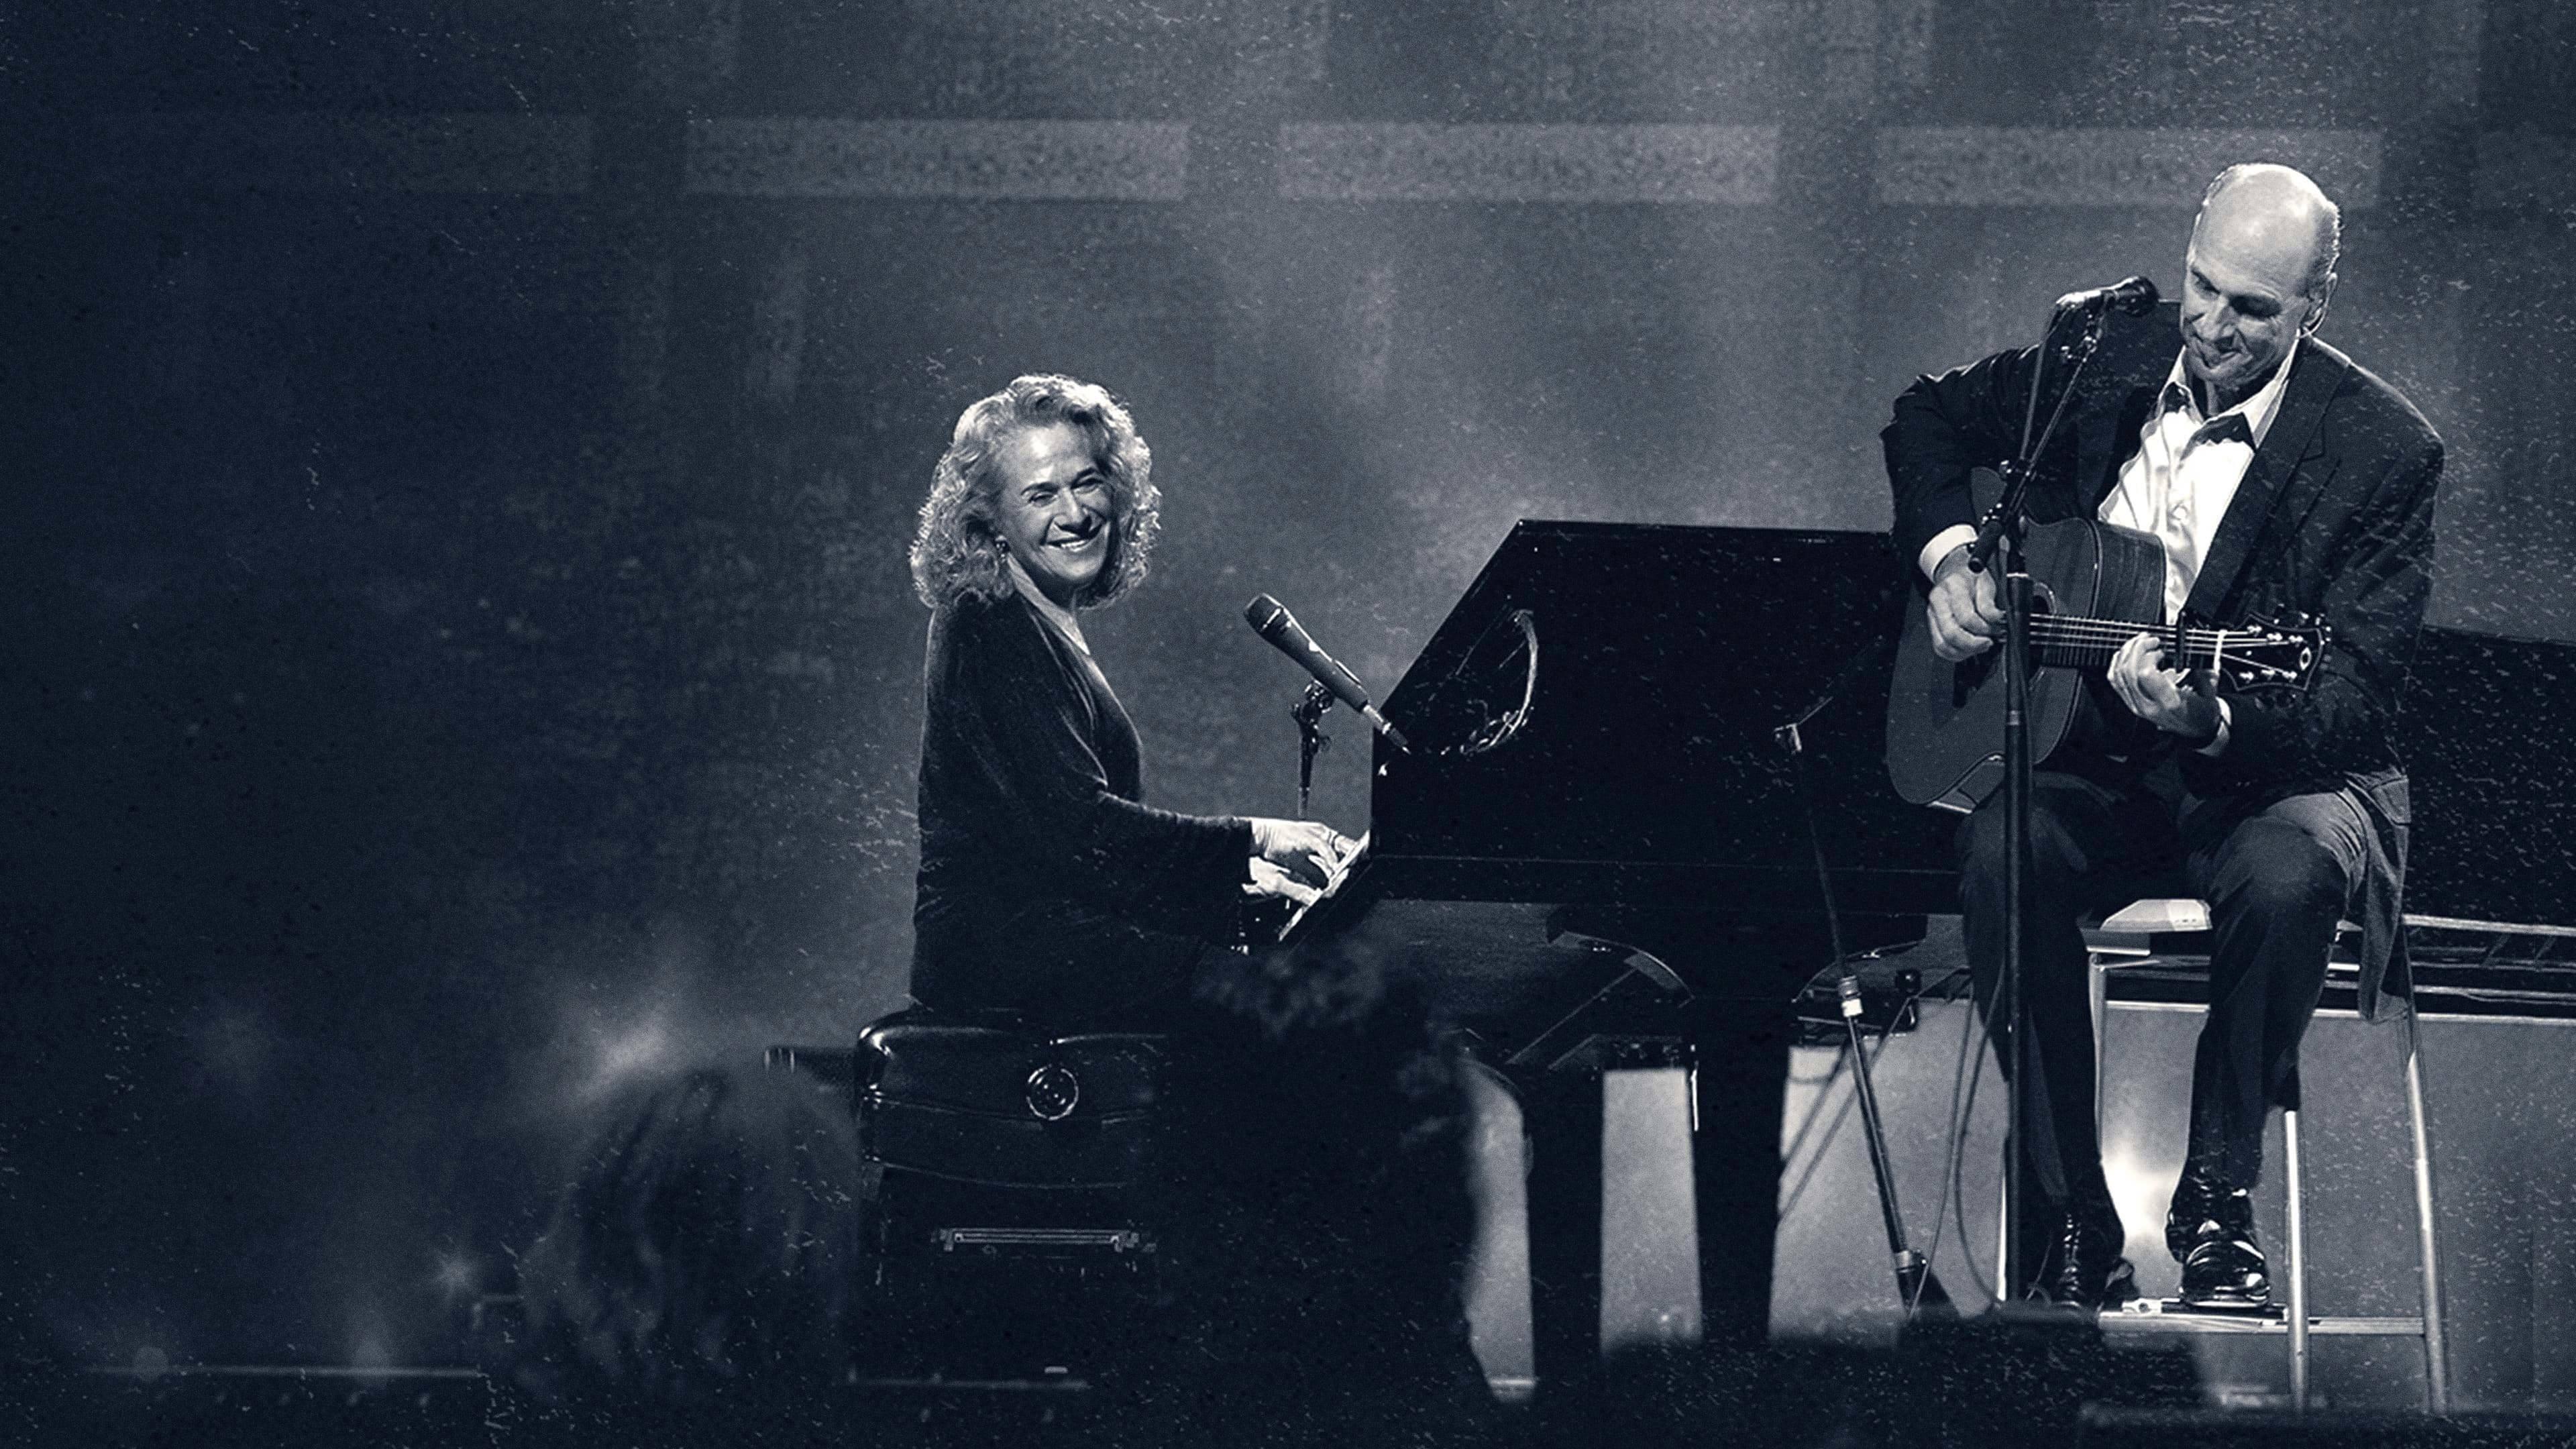 Carole King & James Taylor: Just Call Out My Name backdrop